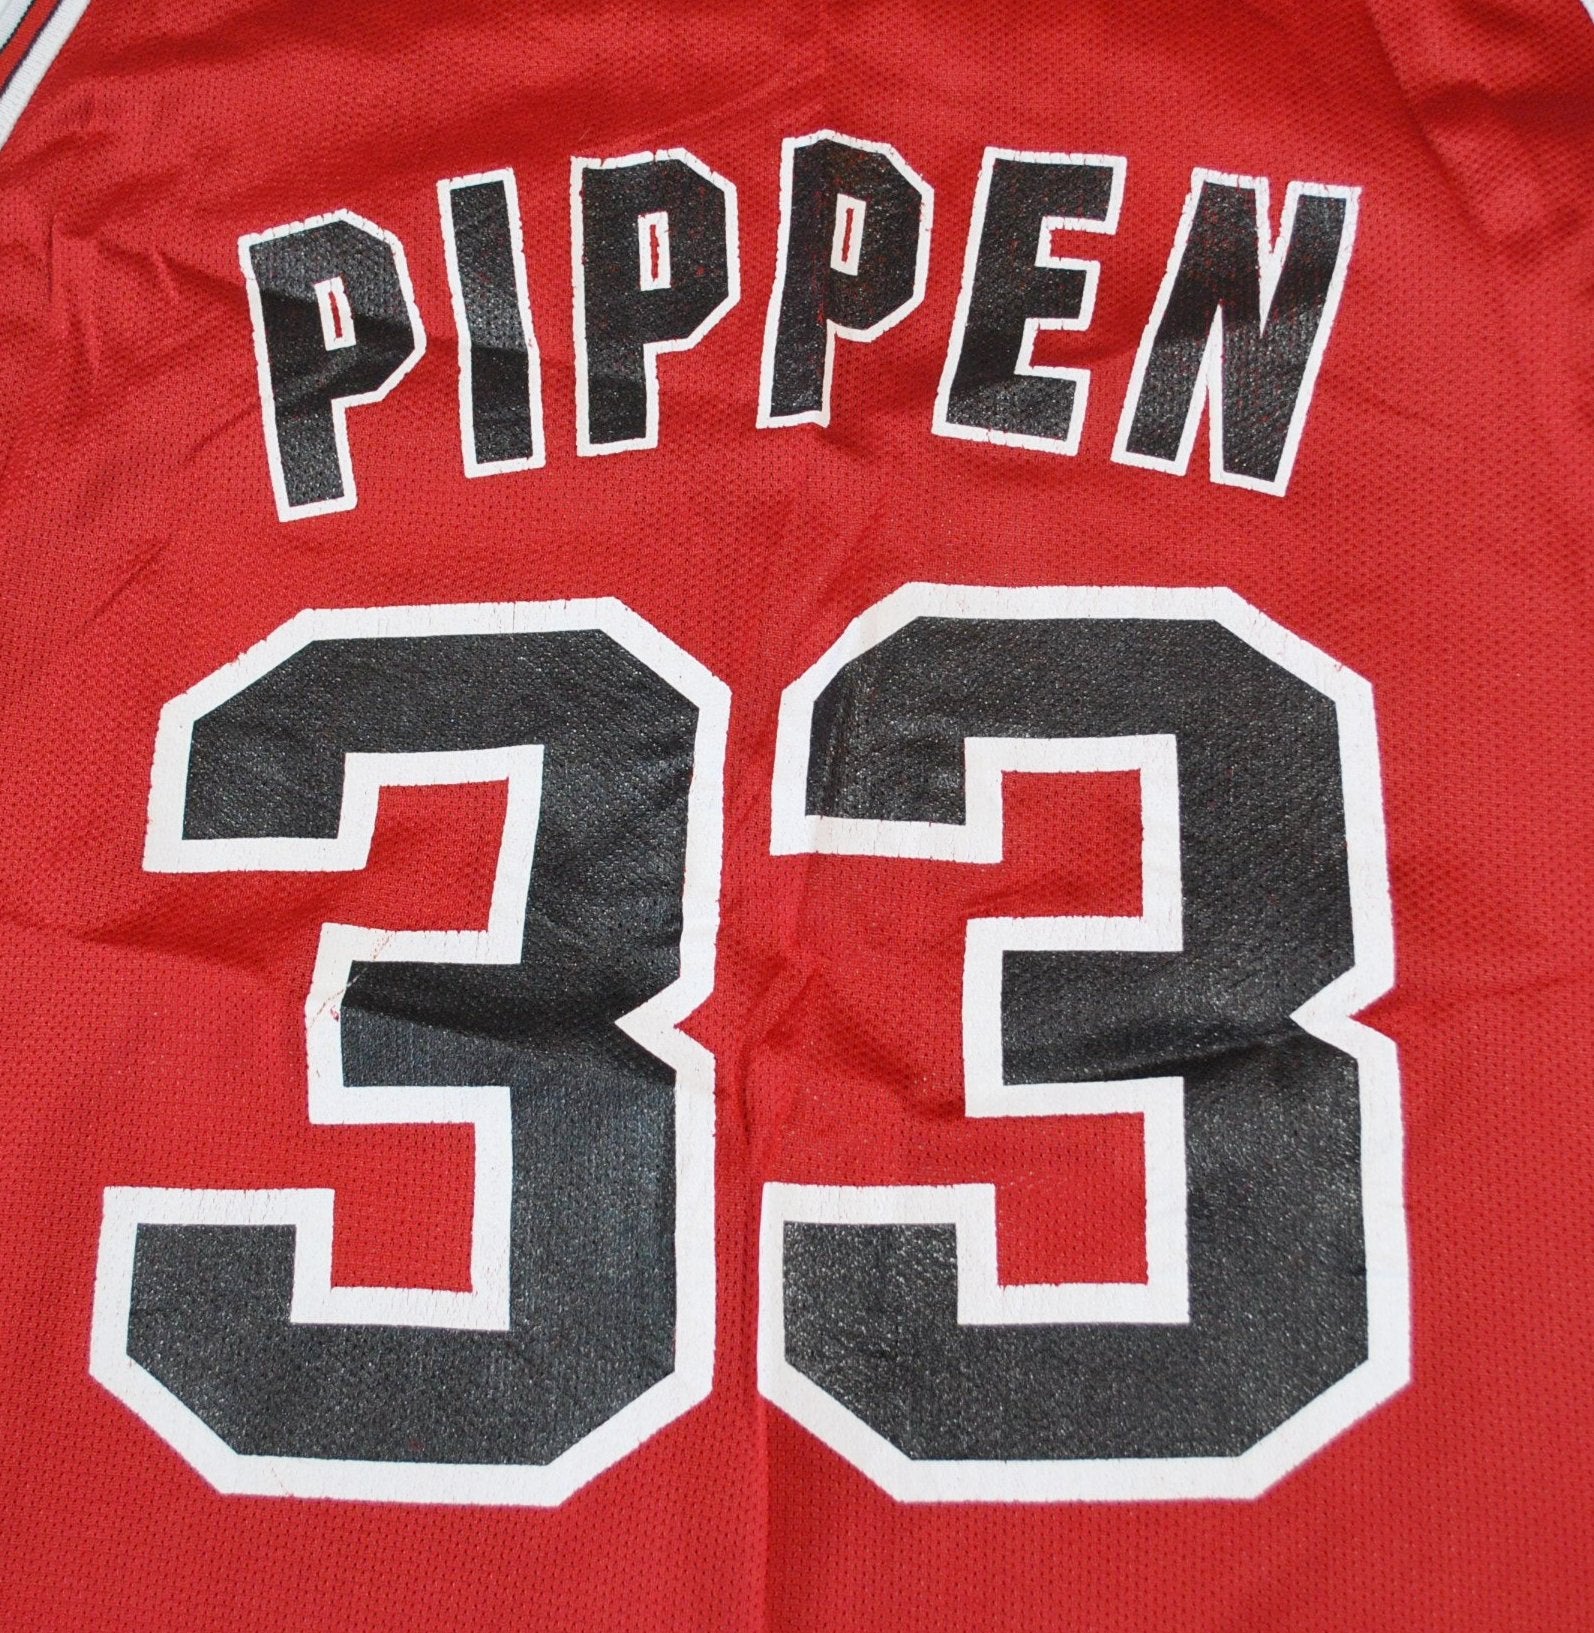 Champion Chicago Bulls Jersey No 33 worn by Scottie Pippen in The